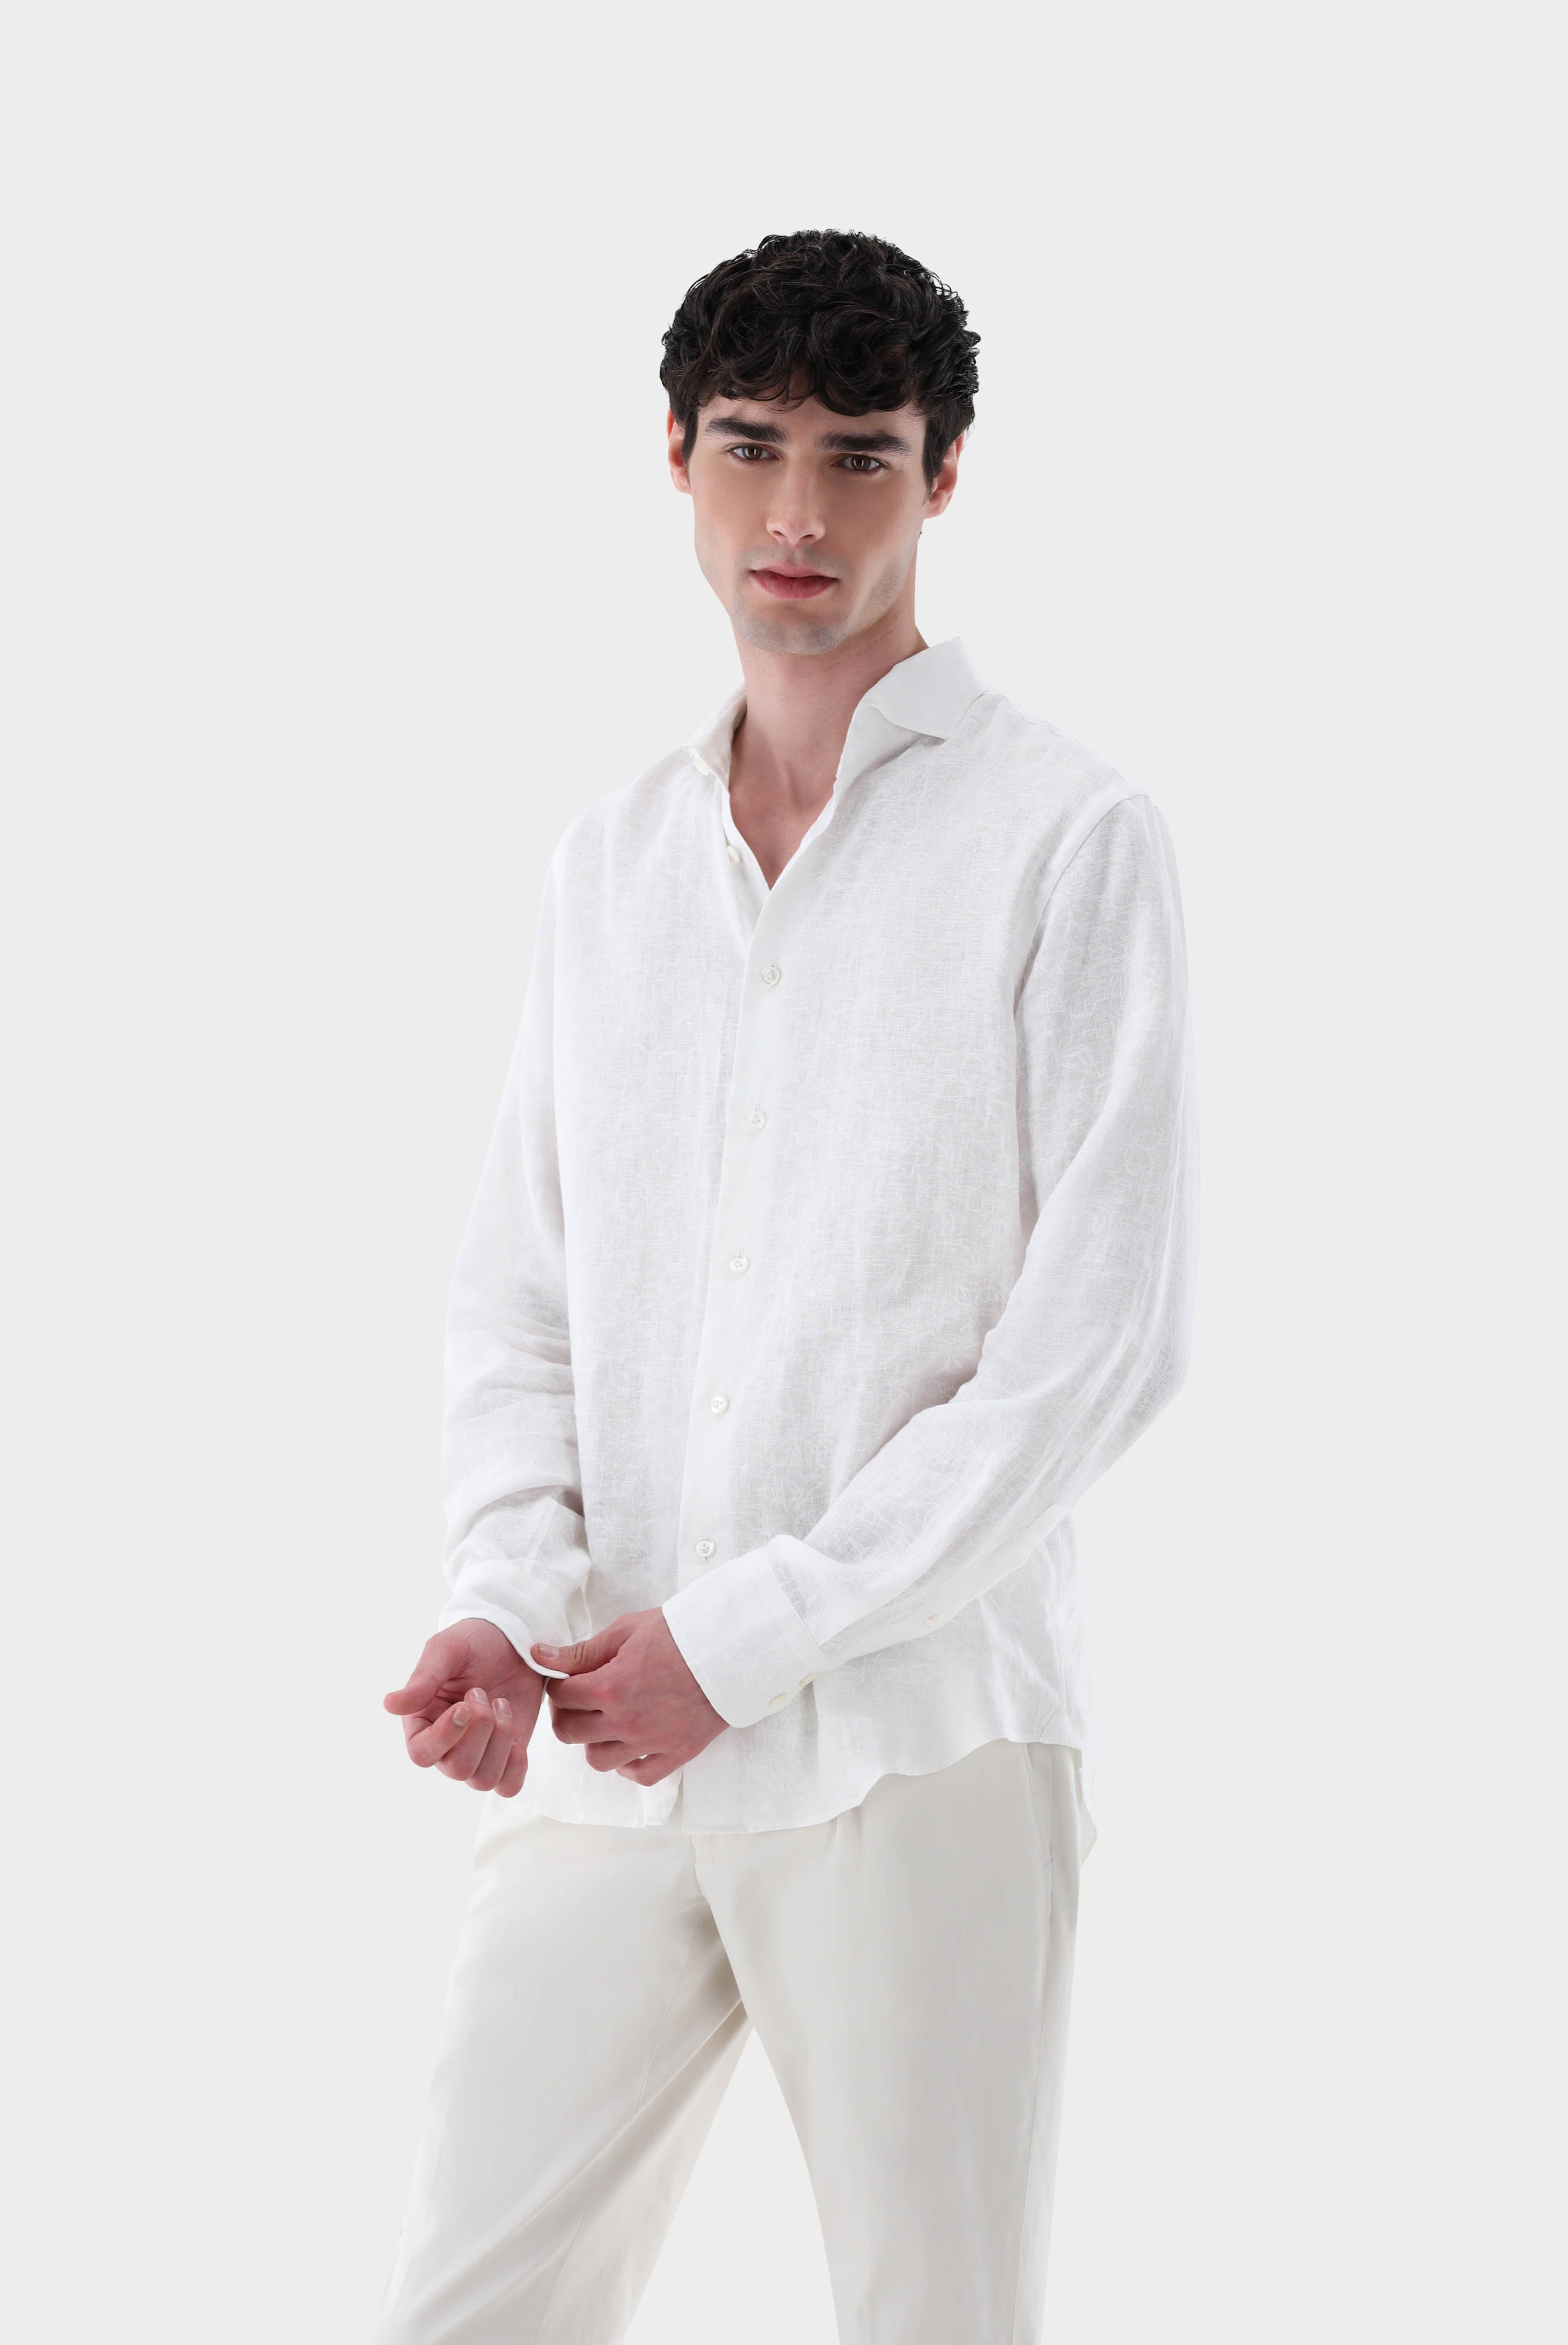 Casual Shirts+White-on-White Printed Linen Shirt Tailor Fit+20.2016.9V.170351.000.38